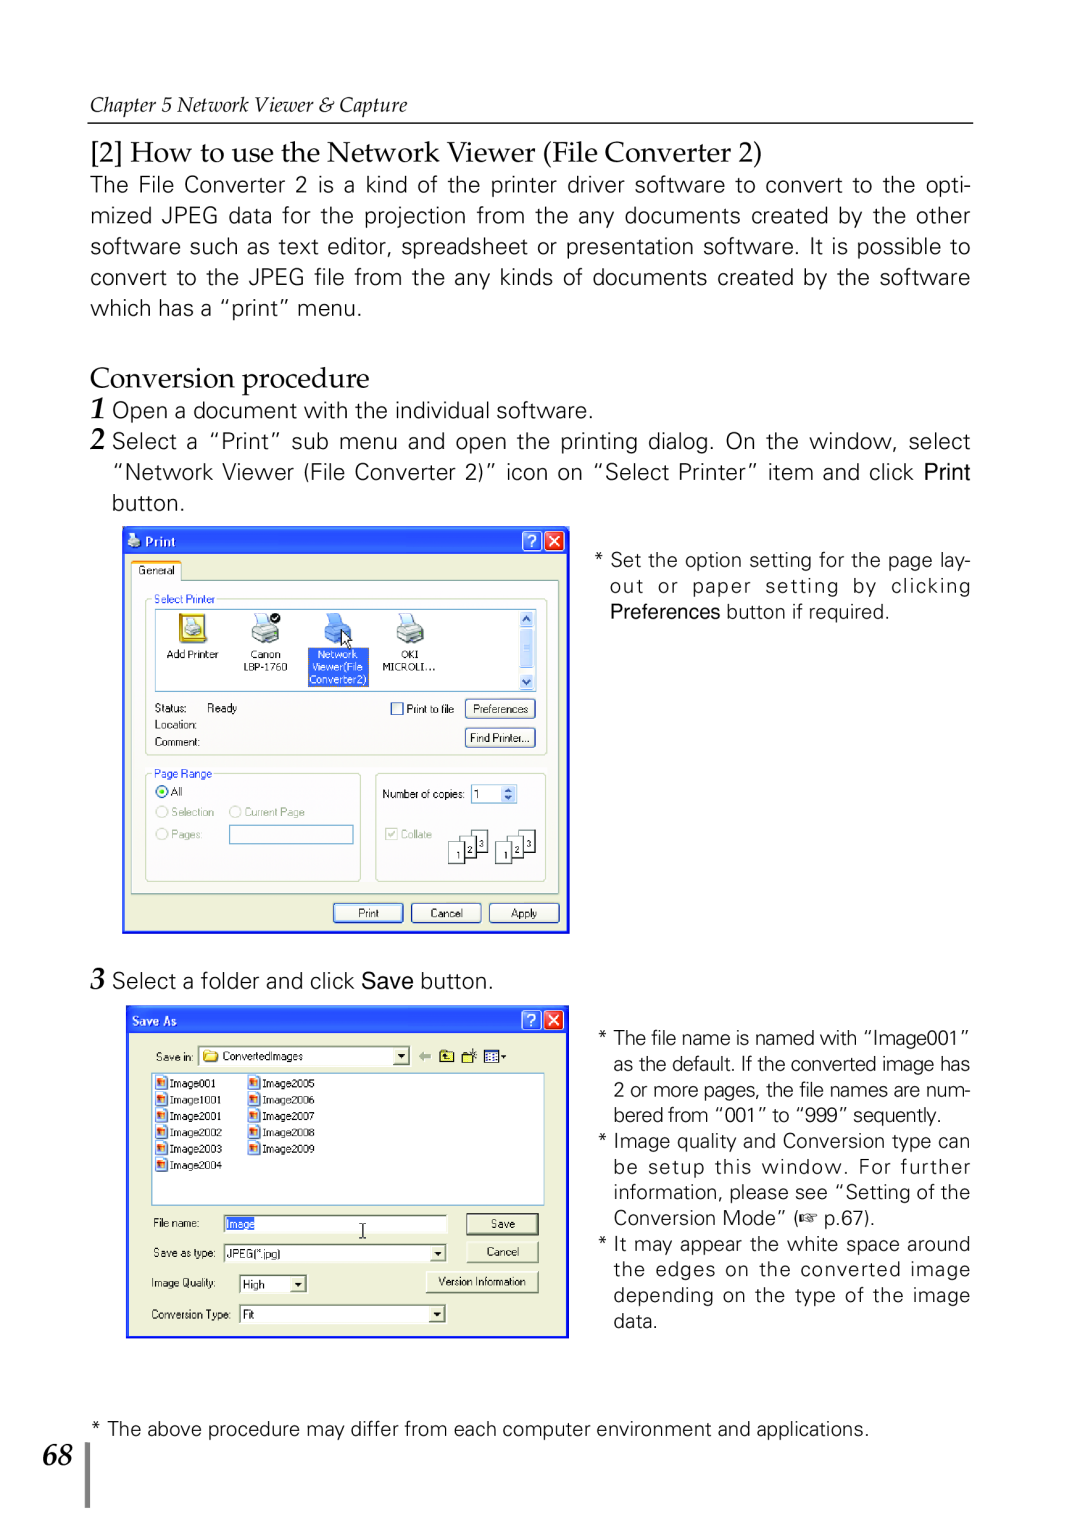 Eiki PjNET-20 owner manual How to use the Network Viewer File Converter, Conversion procedure 